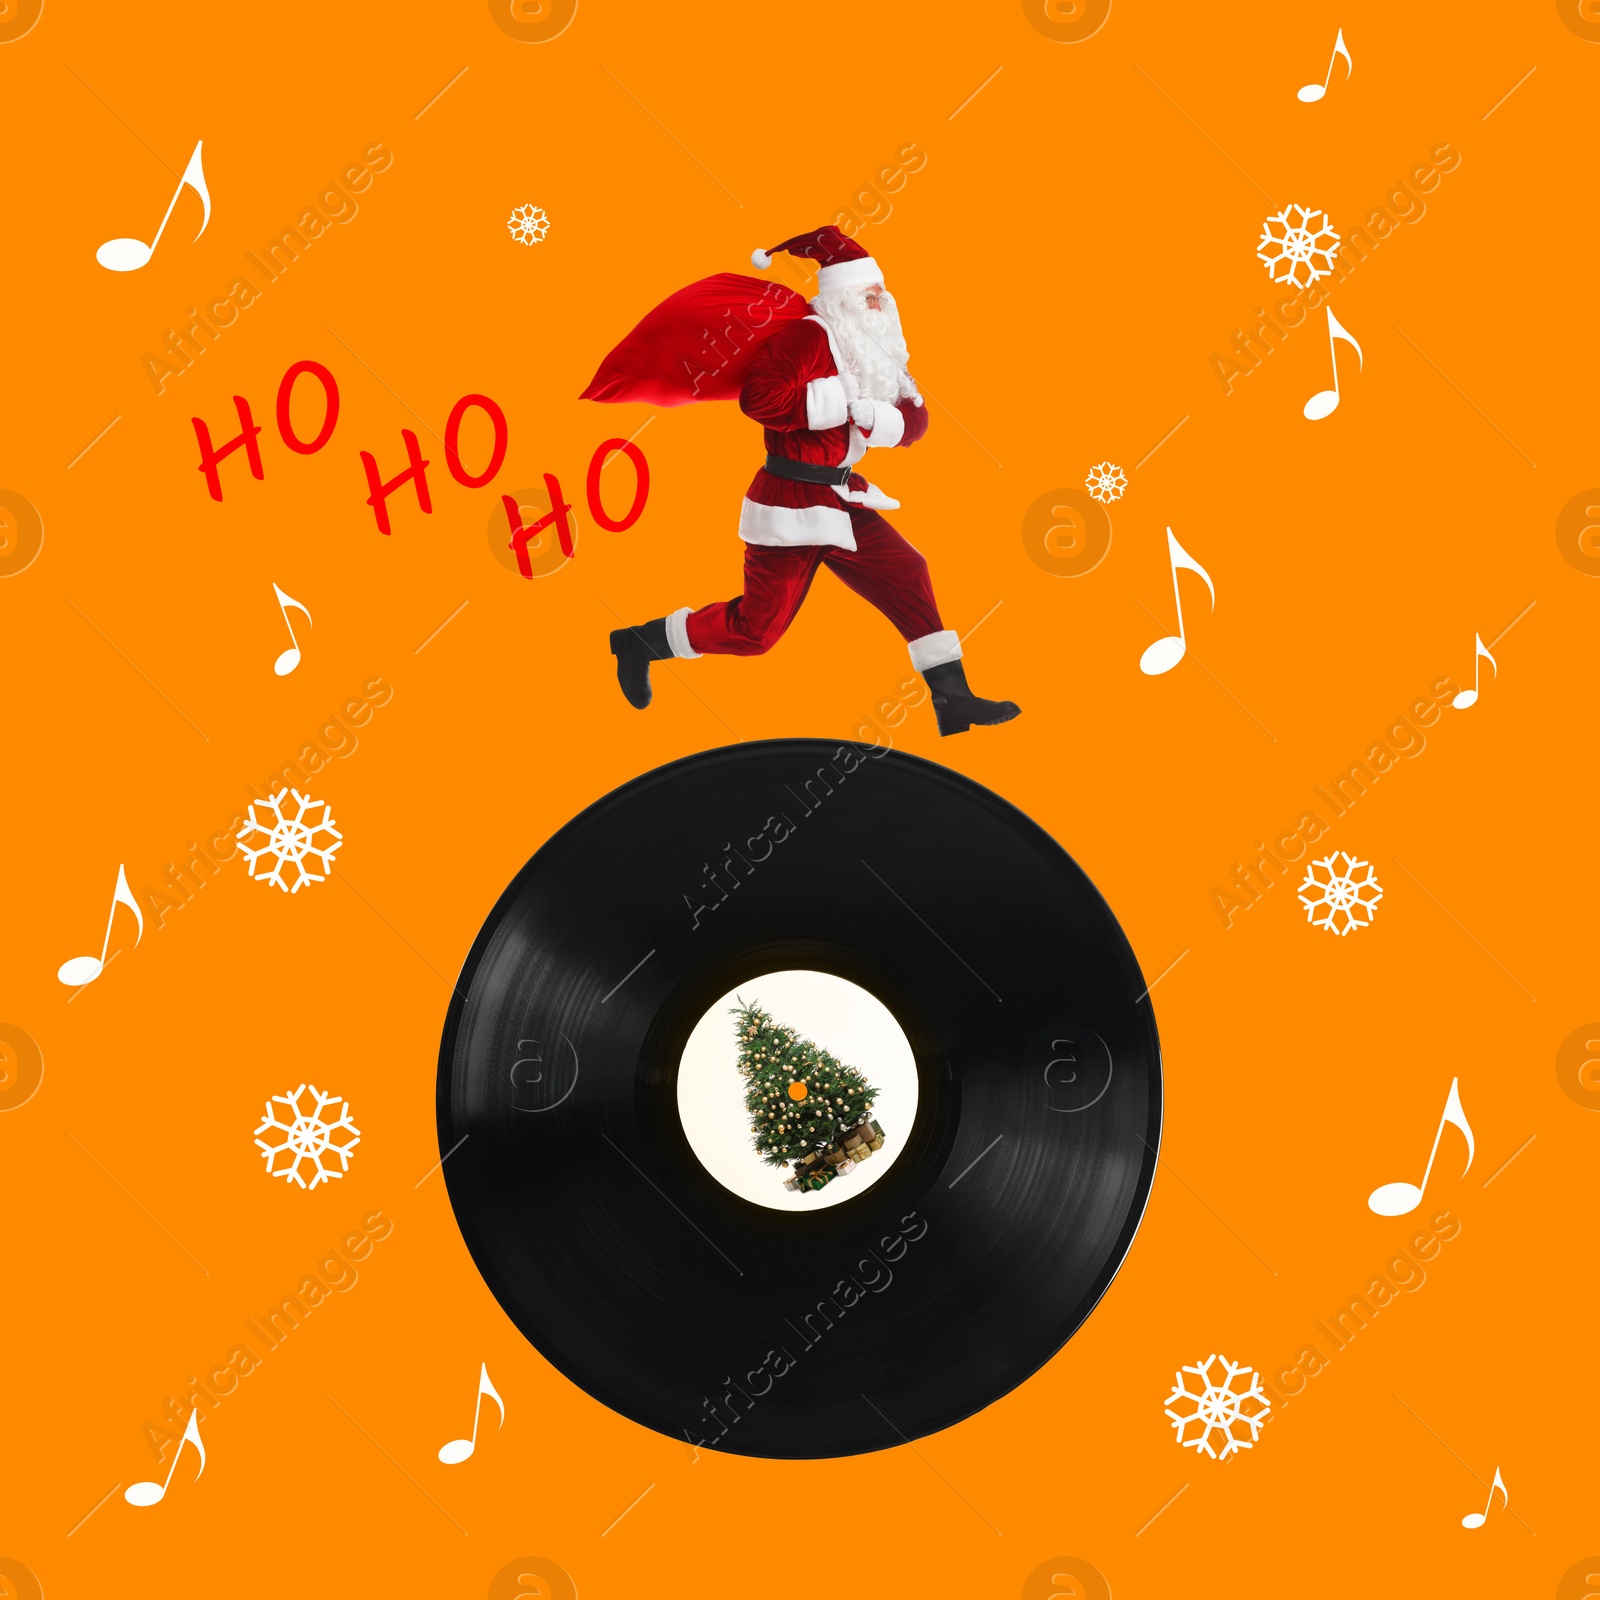 Image of Winter holidays bright artwork. Creative collage with Santa Claus running on vinyl record against orange background